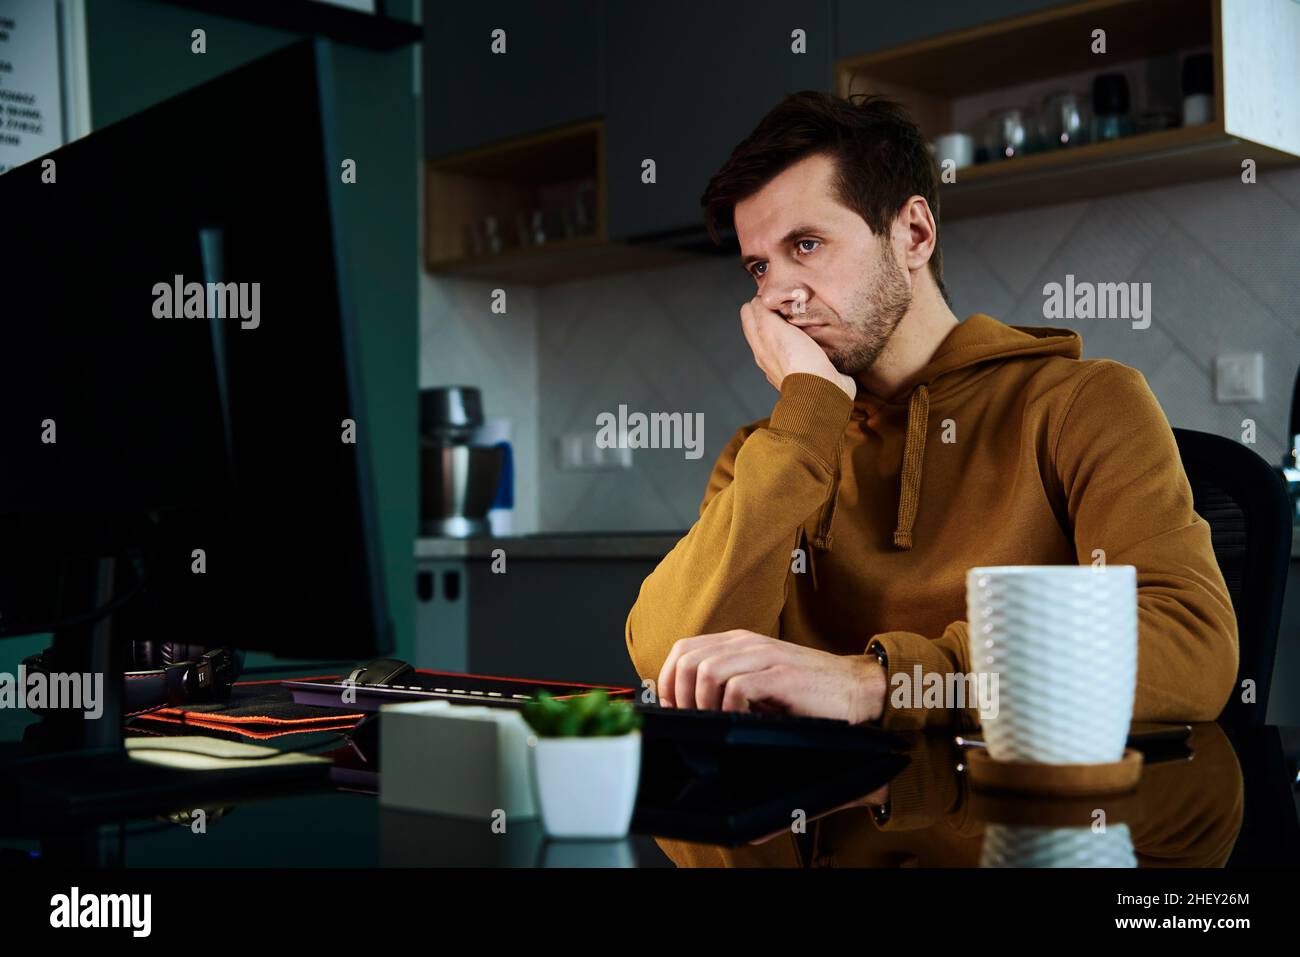 Man works late at home workplace, remote work concept. Burnout and emotional stress due to overworking Stock Photo